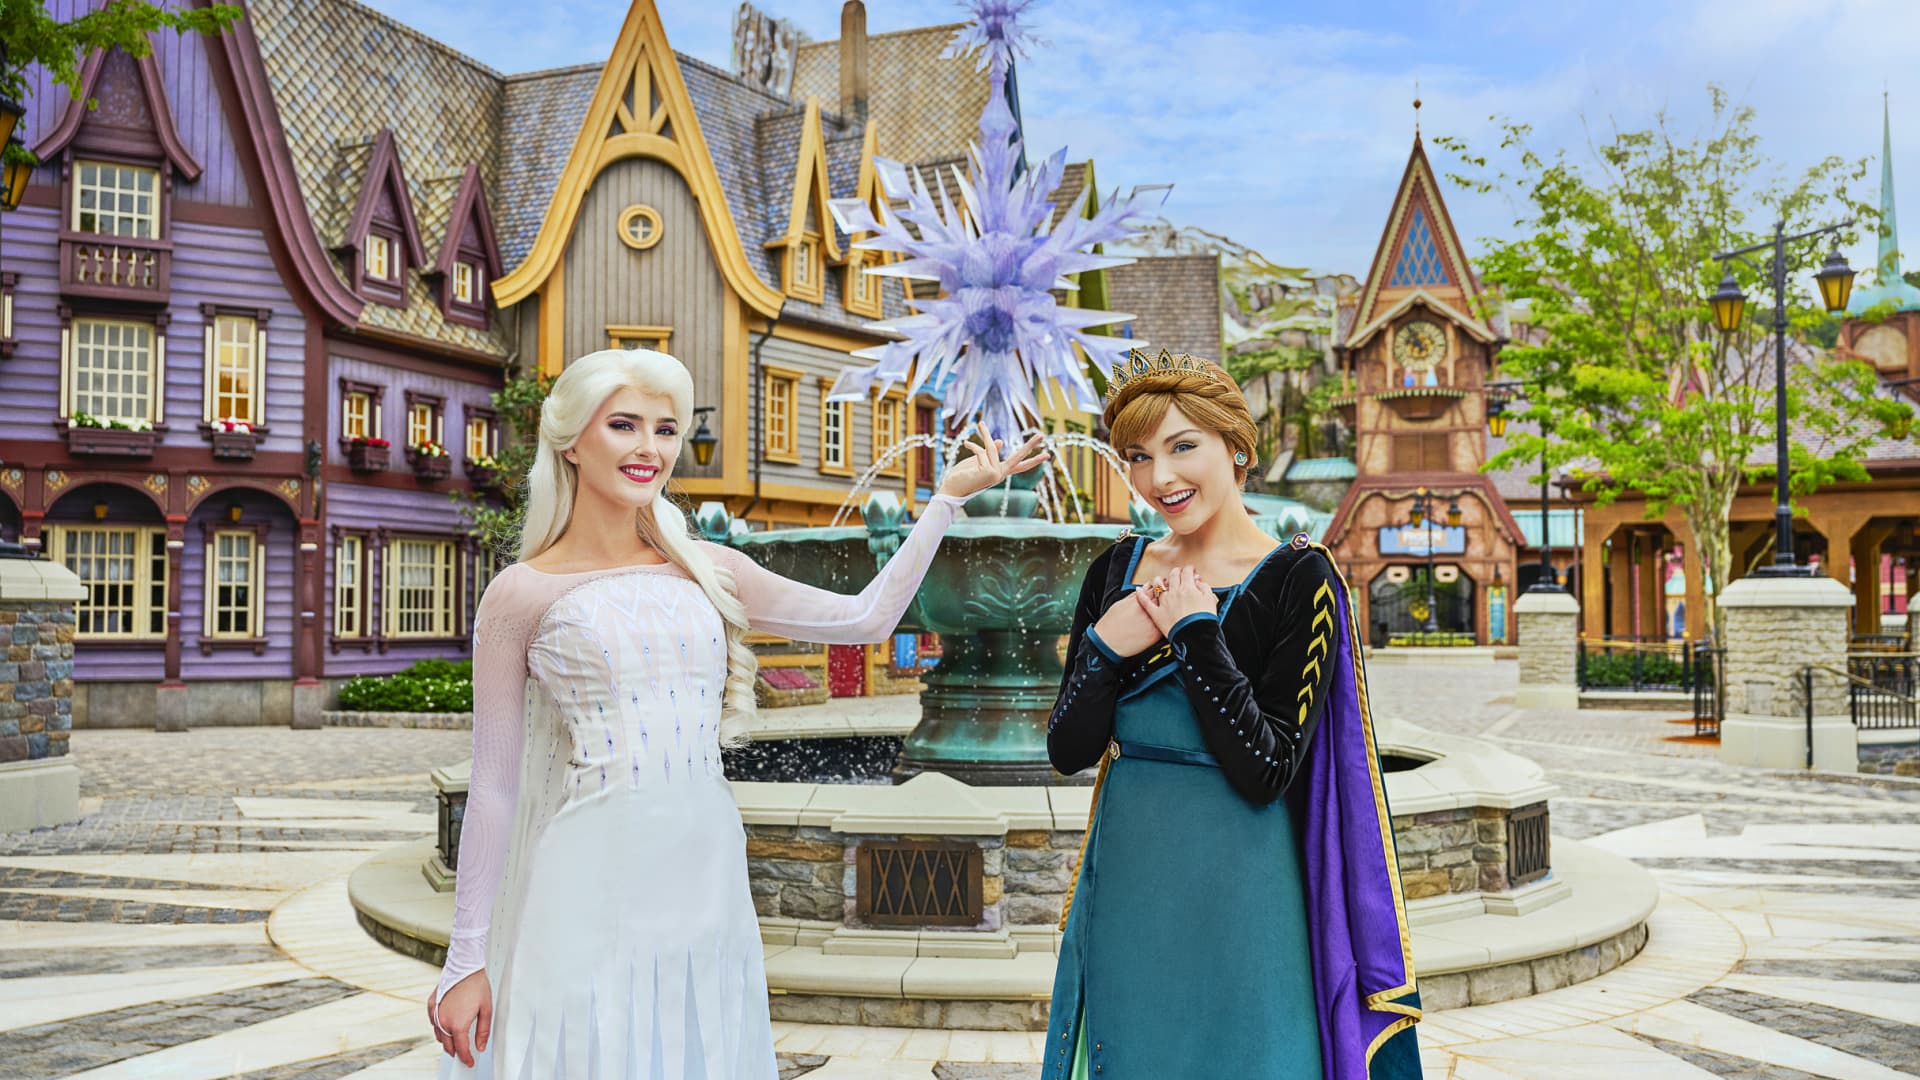 Here’s how to see Disney’s new ‘Frozen’ park area before it opens to the public